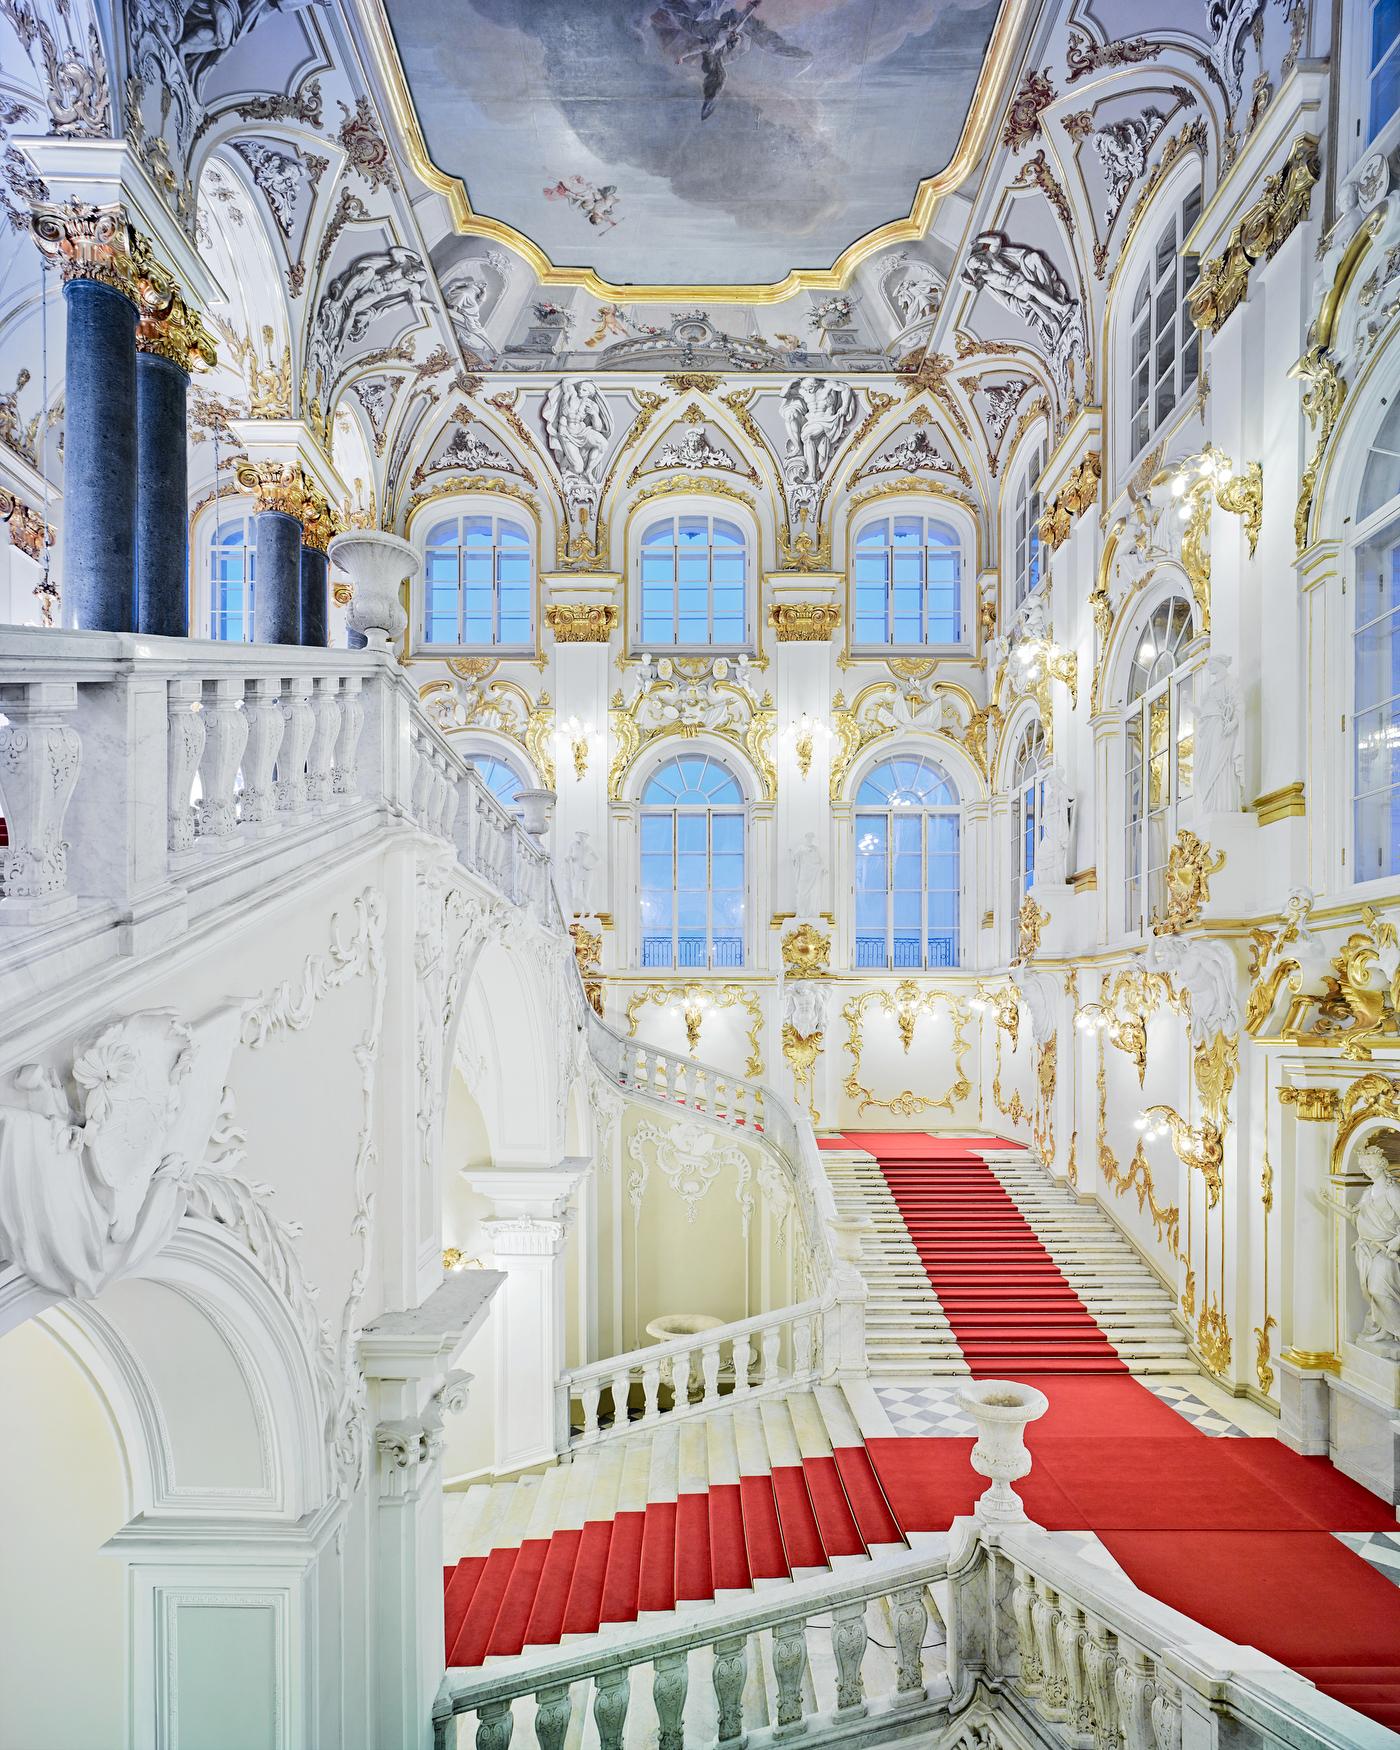 David Burdeny- Jordan Stairs I, State Hermitage, Russia, 2015, Printed After